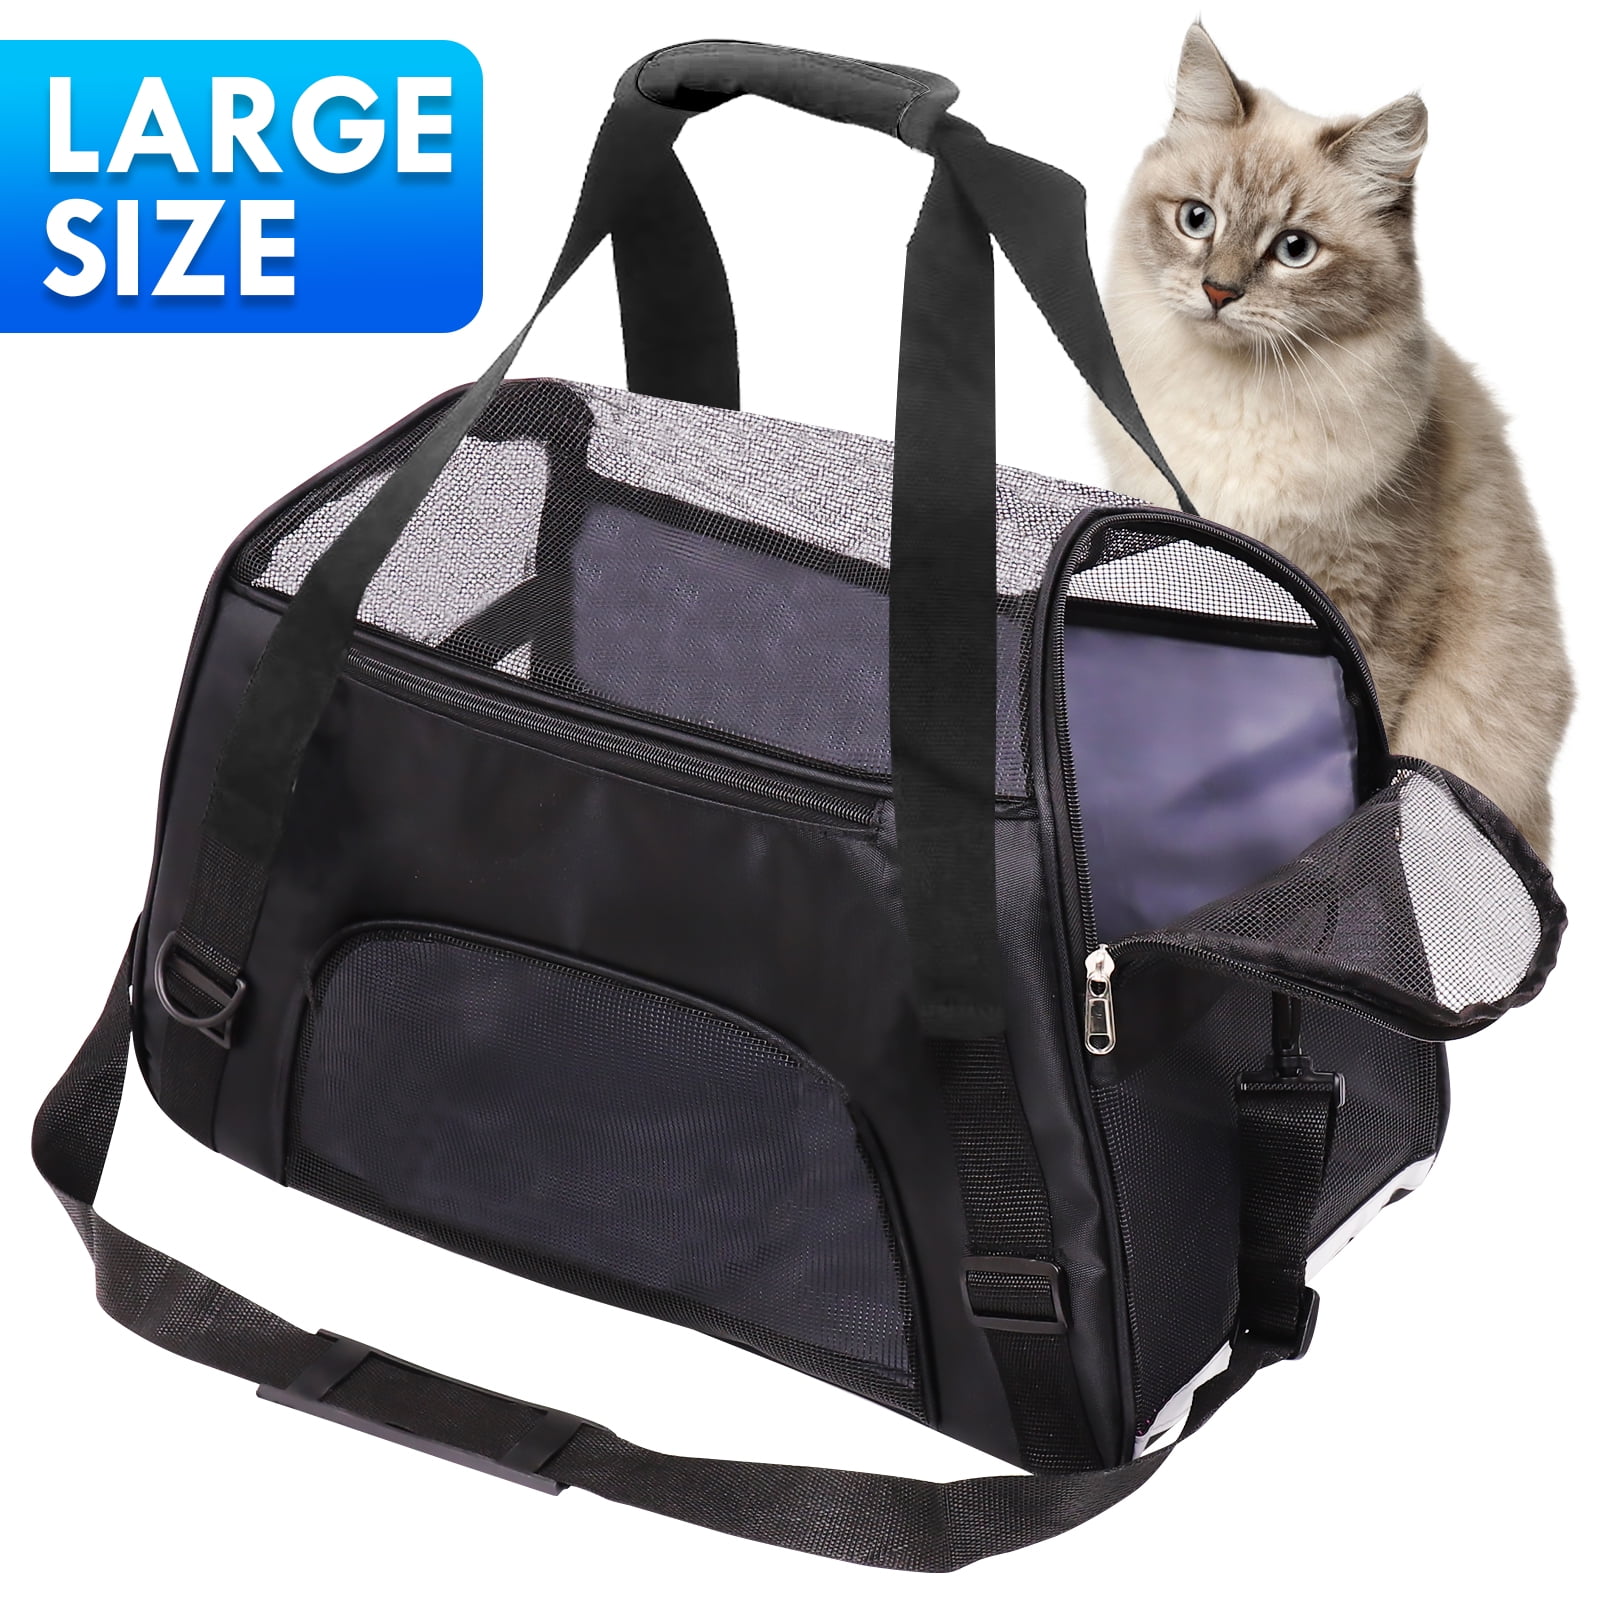 Extra Large Cat Carrier (Perfect For Vet Visits) –